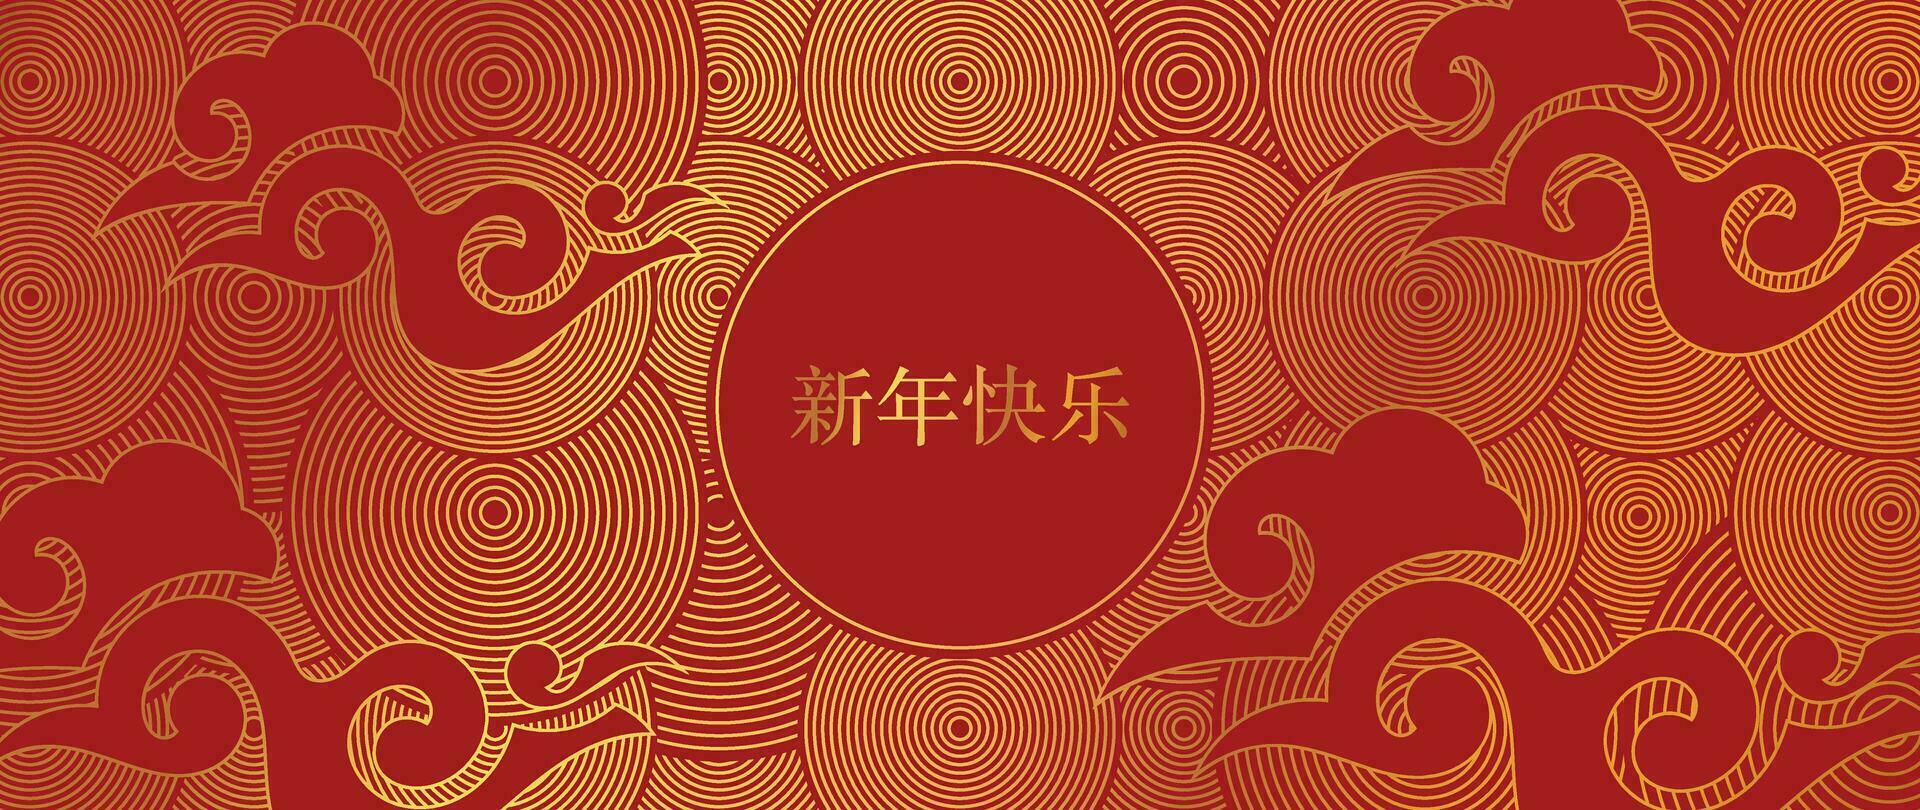 Happy Chinese new year background vector. Year of the dragon design wallpaper with chinese cloud, line pattern. Modern luxury oriental illustration for cover, banner, website, decor. vector